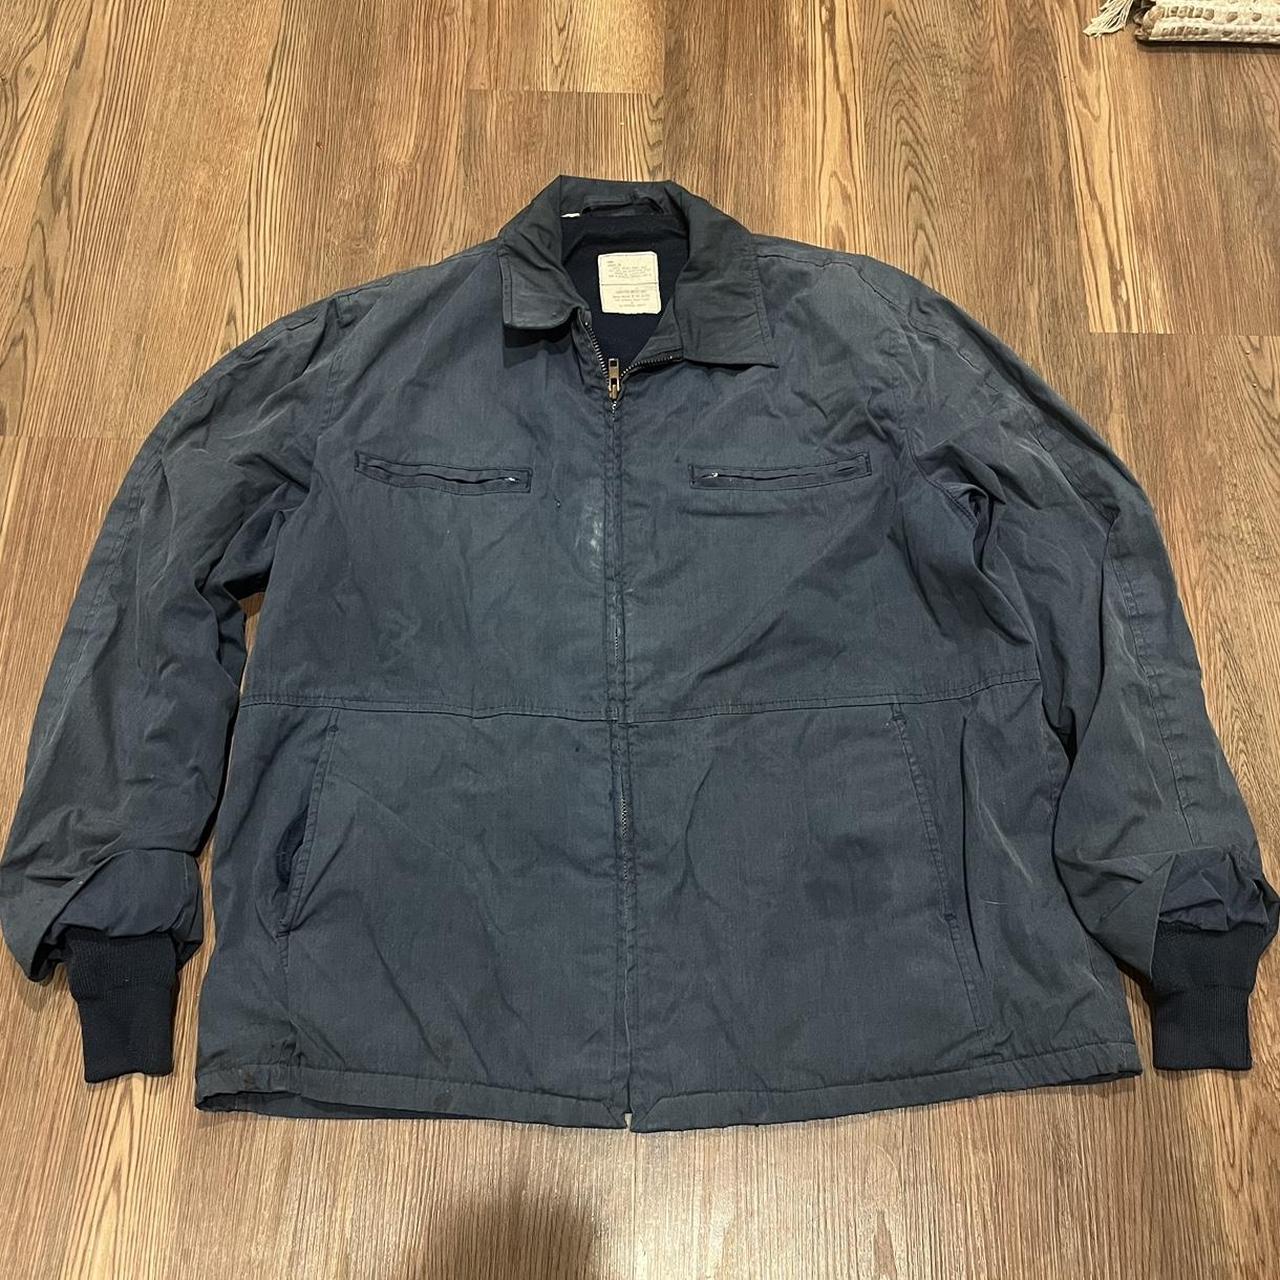 Men's Navy and Blue Jacket